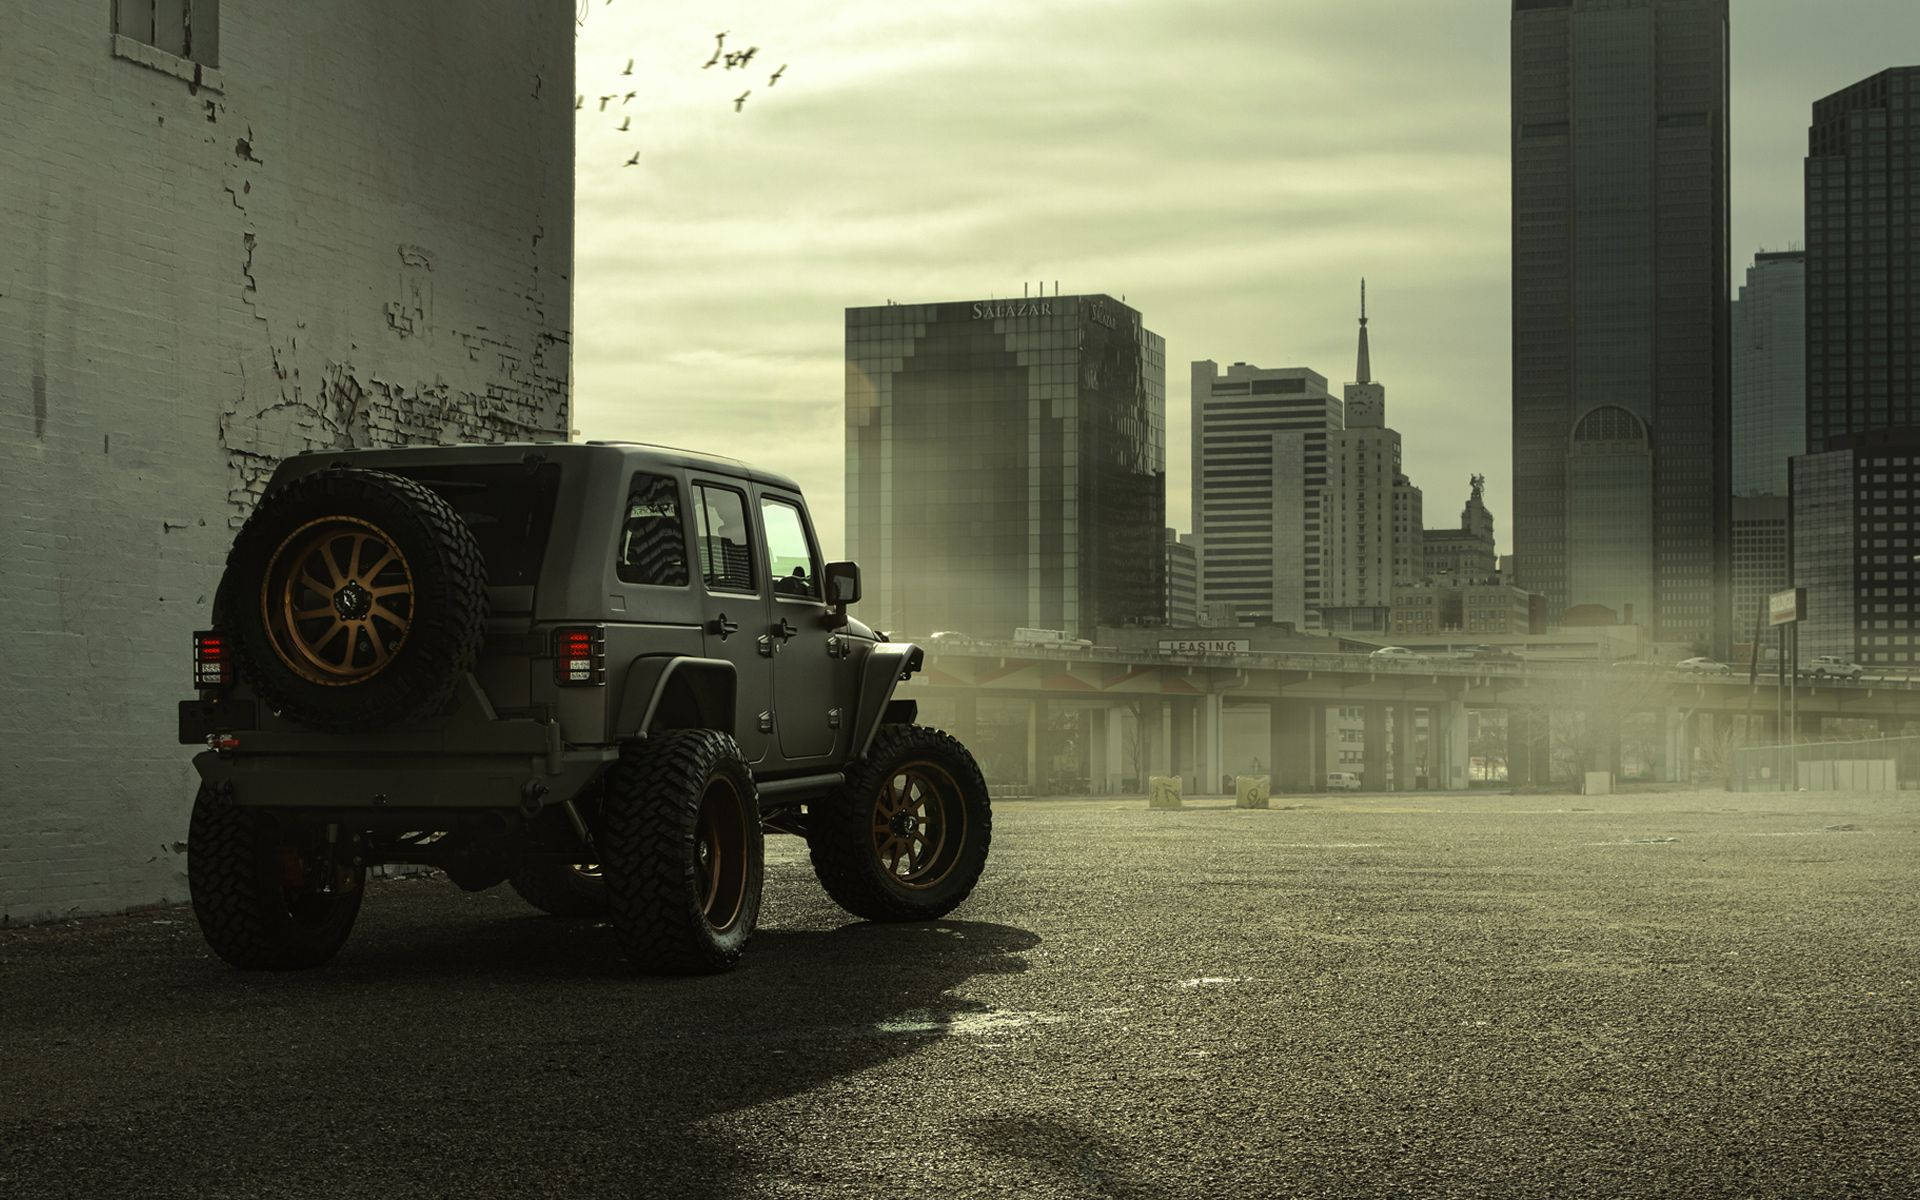 Black Jeep Wrangler Parked In City Background